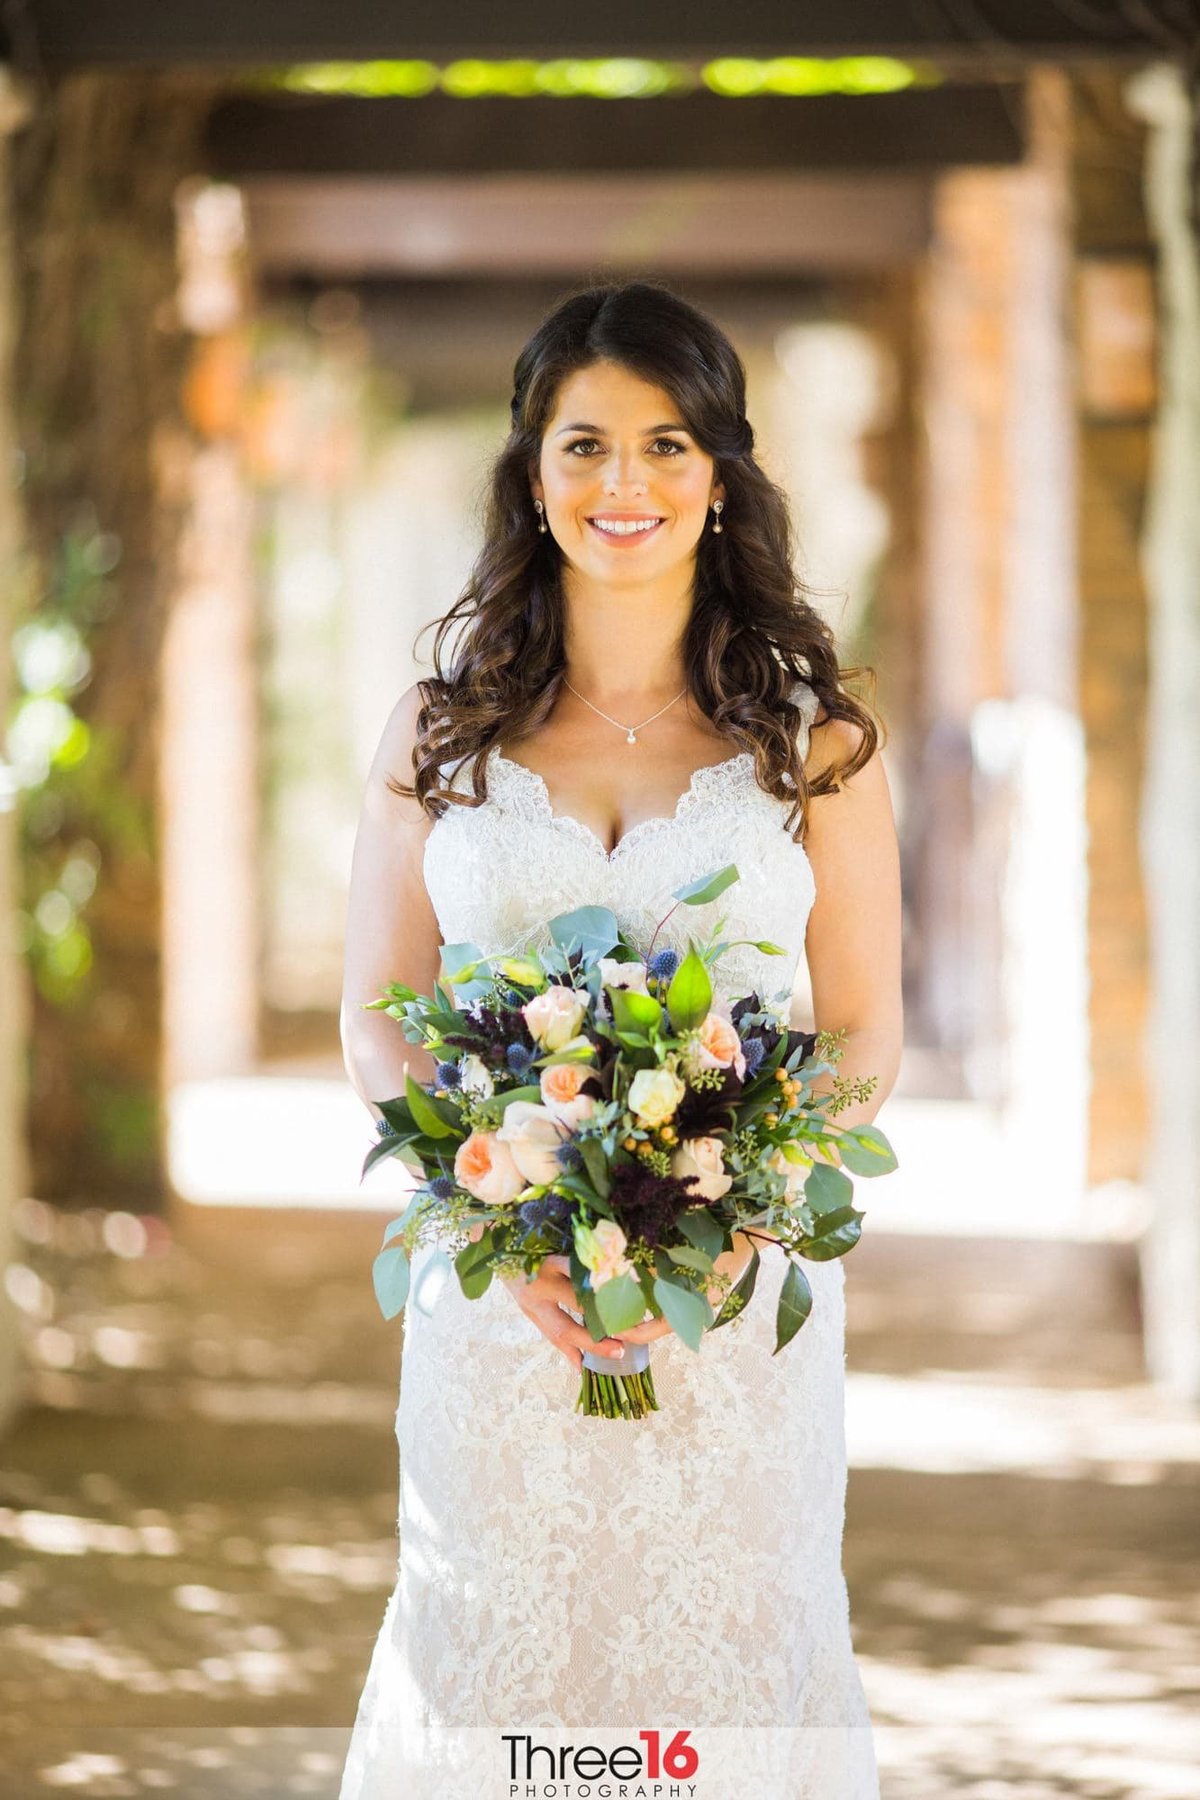 Bride posing for photos with large smile and beautiful bouquet